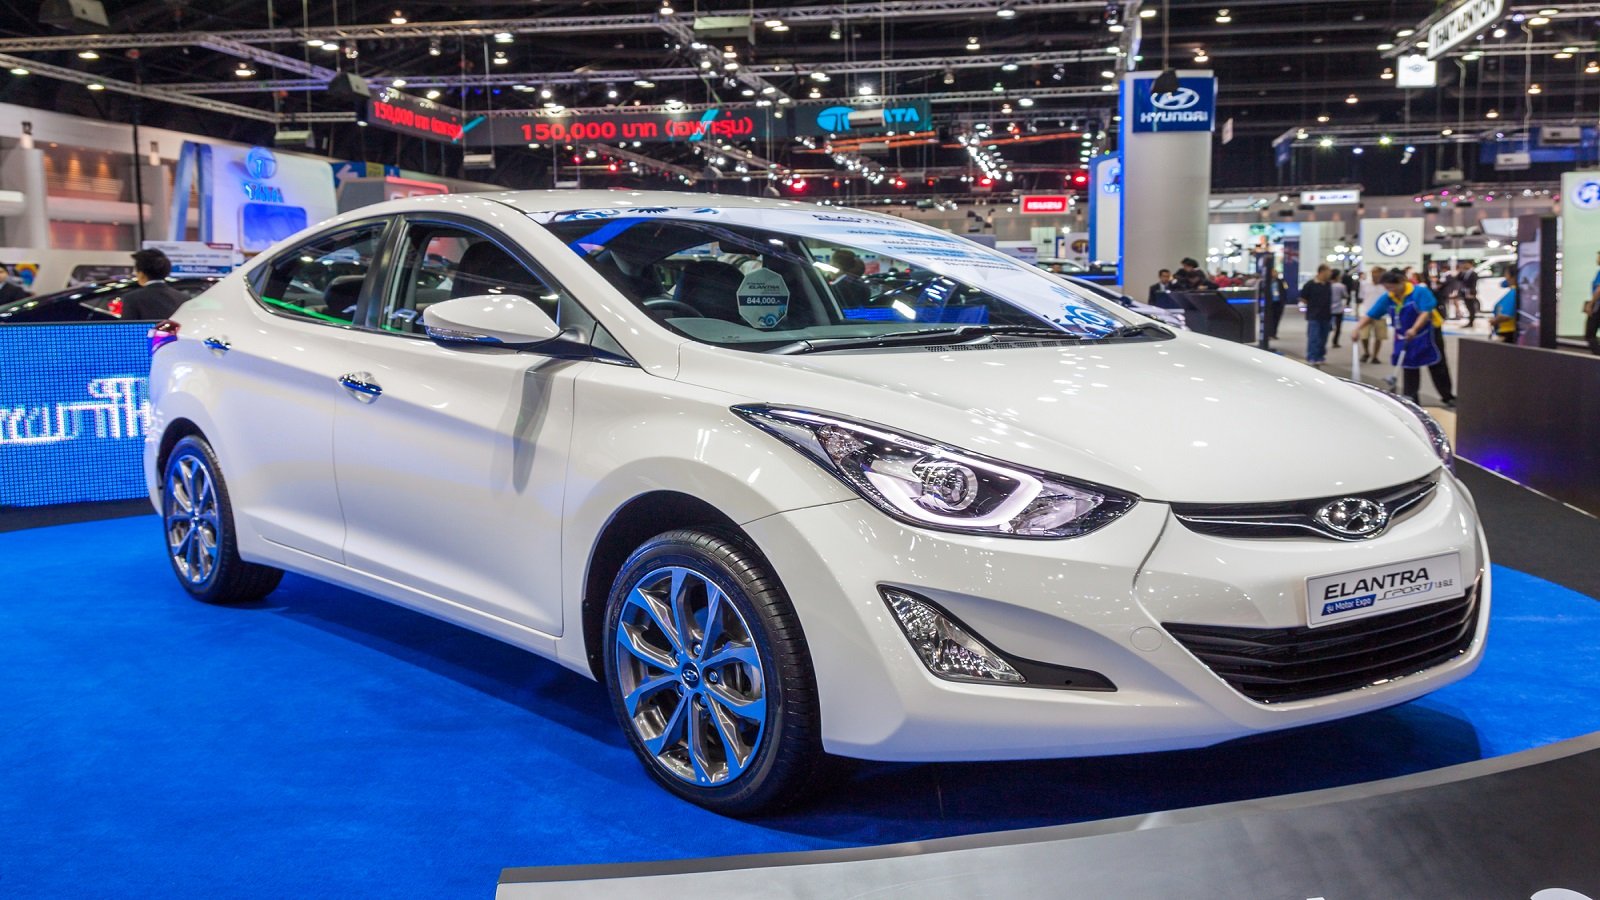 <p>The 2024 Hyundai Elantra is a wallet-friendly option that boasts impressive fuel efficiency, tech features, and a comfortable cabin. With its high fuel economy – the Elantra SE offering up to 32 mpg in the city and 41 mpg on the highway, you’ll save money on gas without sacrificing comfort or performance.</p><p>Unique features of the Elantra include a <strong>10.25-inch touchscreen navigation</strong> system, ample safety features, and a roomy interior. The generous <strong>standard features</strong> include advanced safety options such as forward-collision warning, lane-keep assist, and a rearview camera.</p>